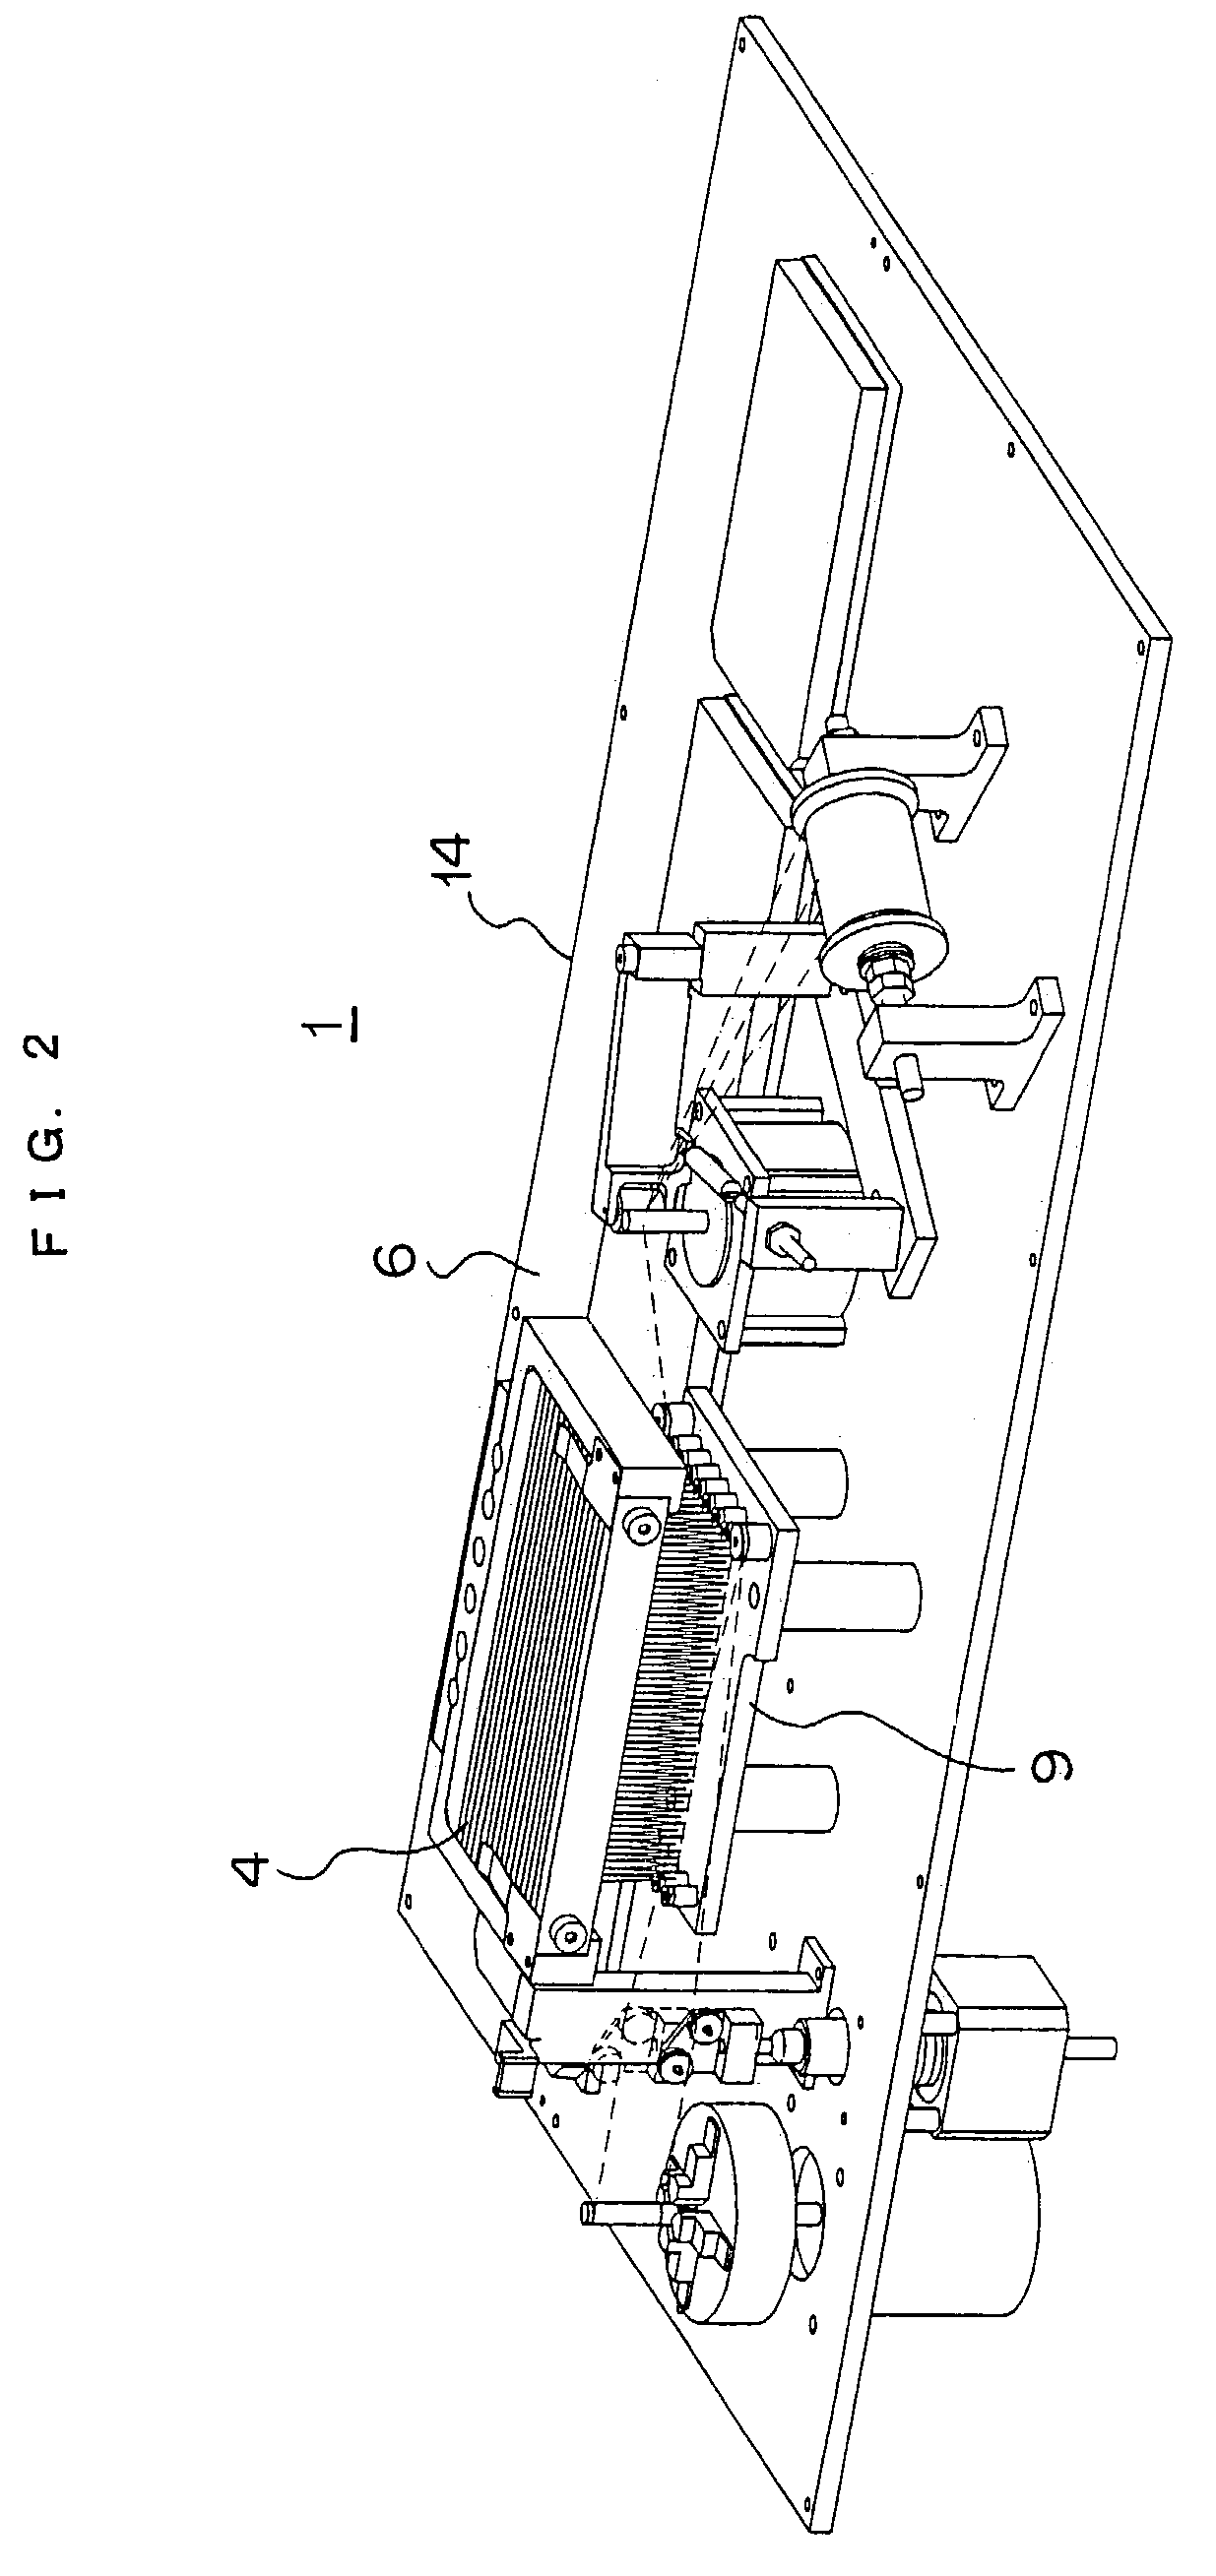 Samples delivering device, method of manufacturing samples applicator, method of delivering samples, and base activation device